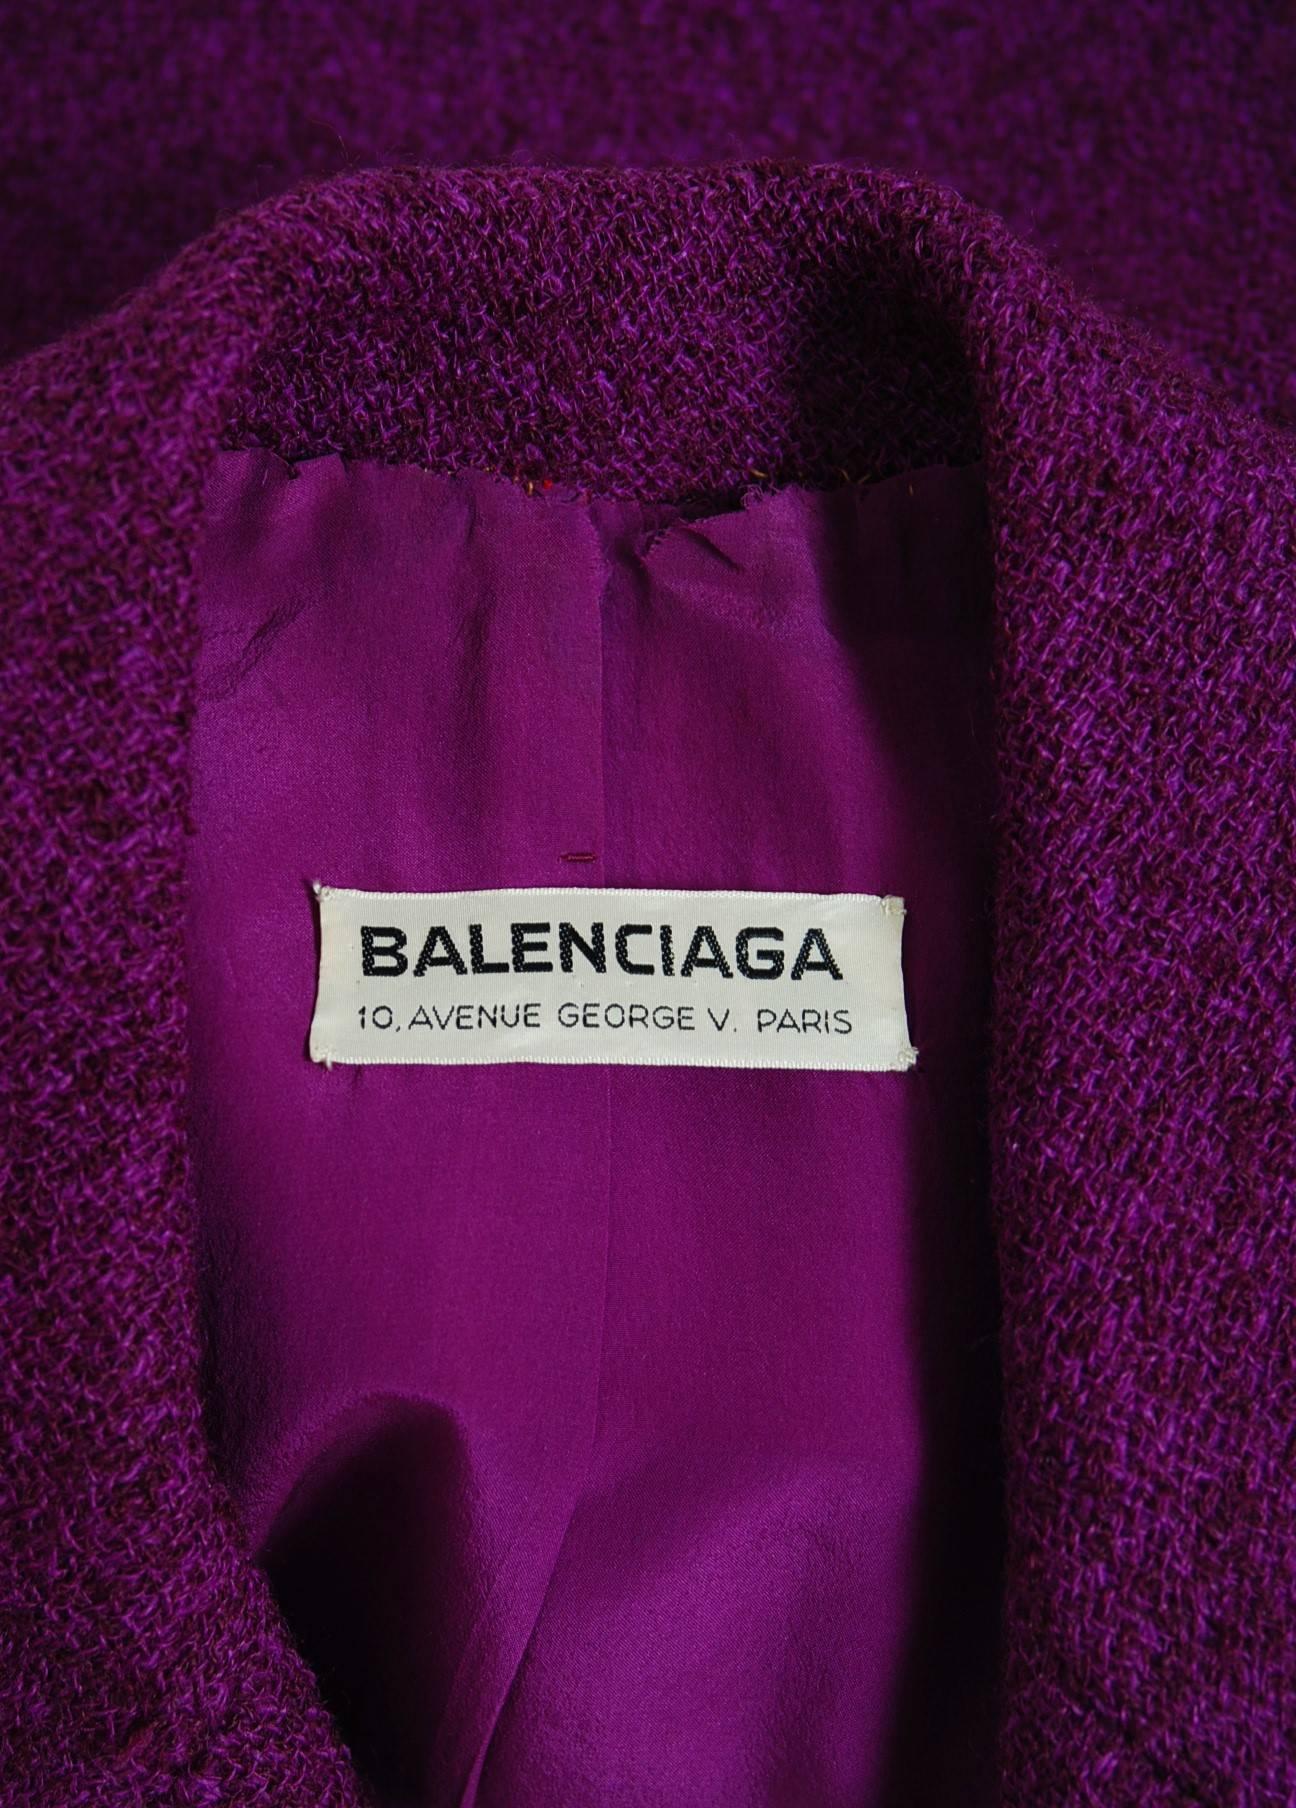 1967 Balenciaga Haute-Couture Royal Purple Wool Double-Breasted Mod Skirt Suit  1